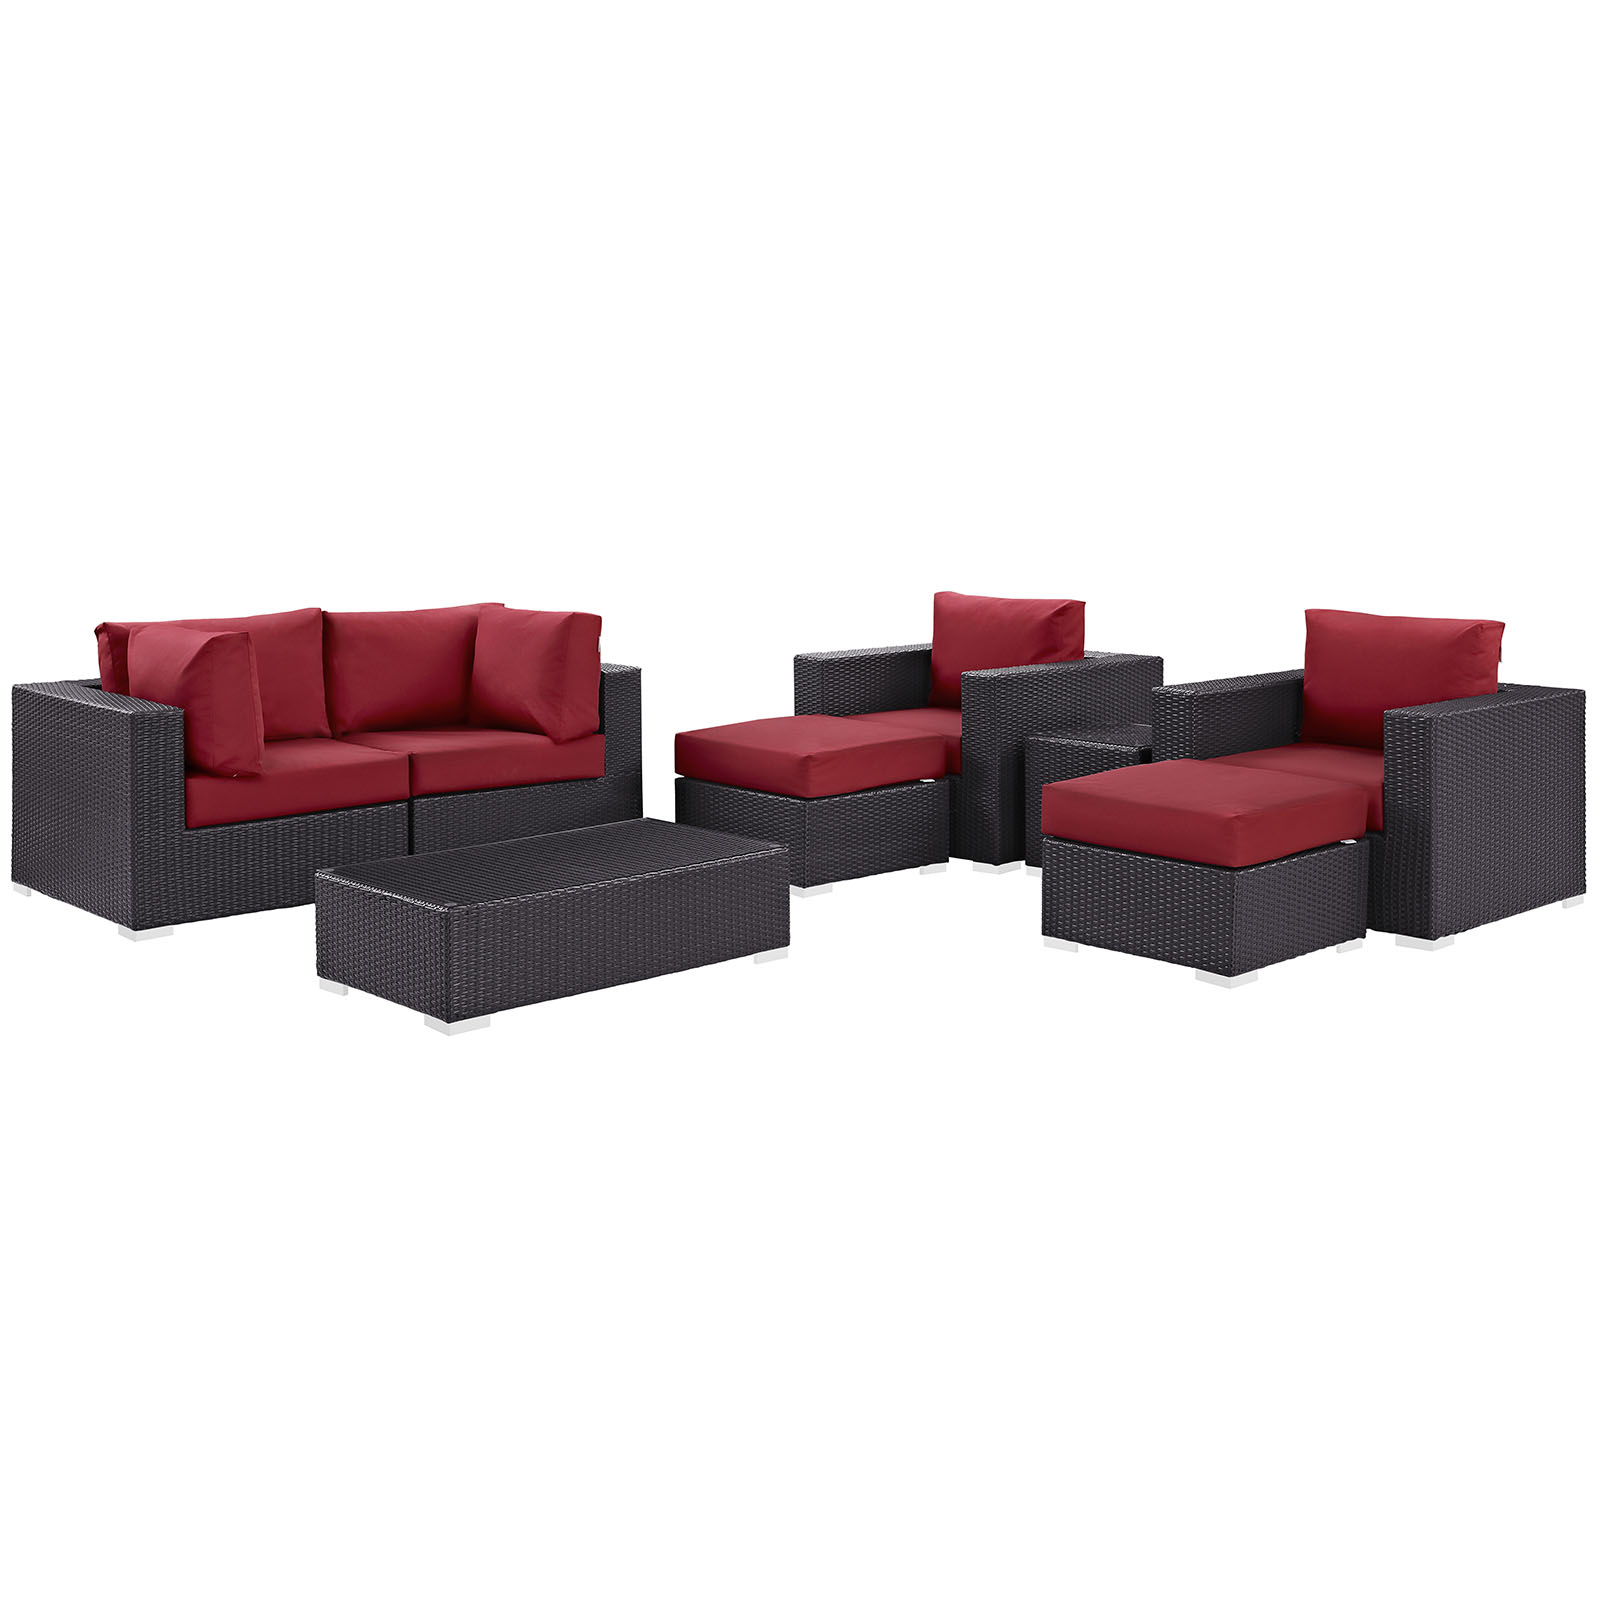 Modway Convene 8 Piece Outdoor Patio Sectional Set in Espresso Red - image 2 of 11